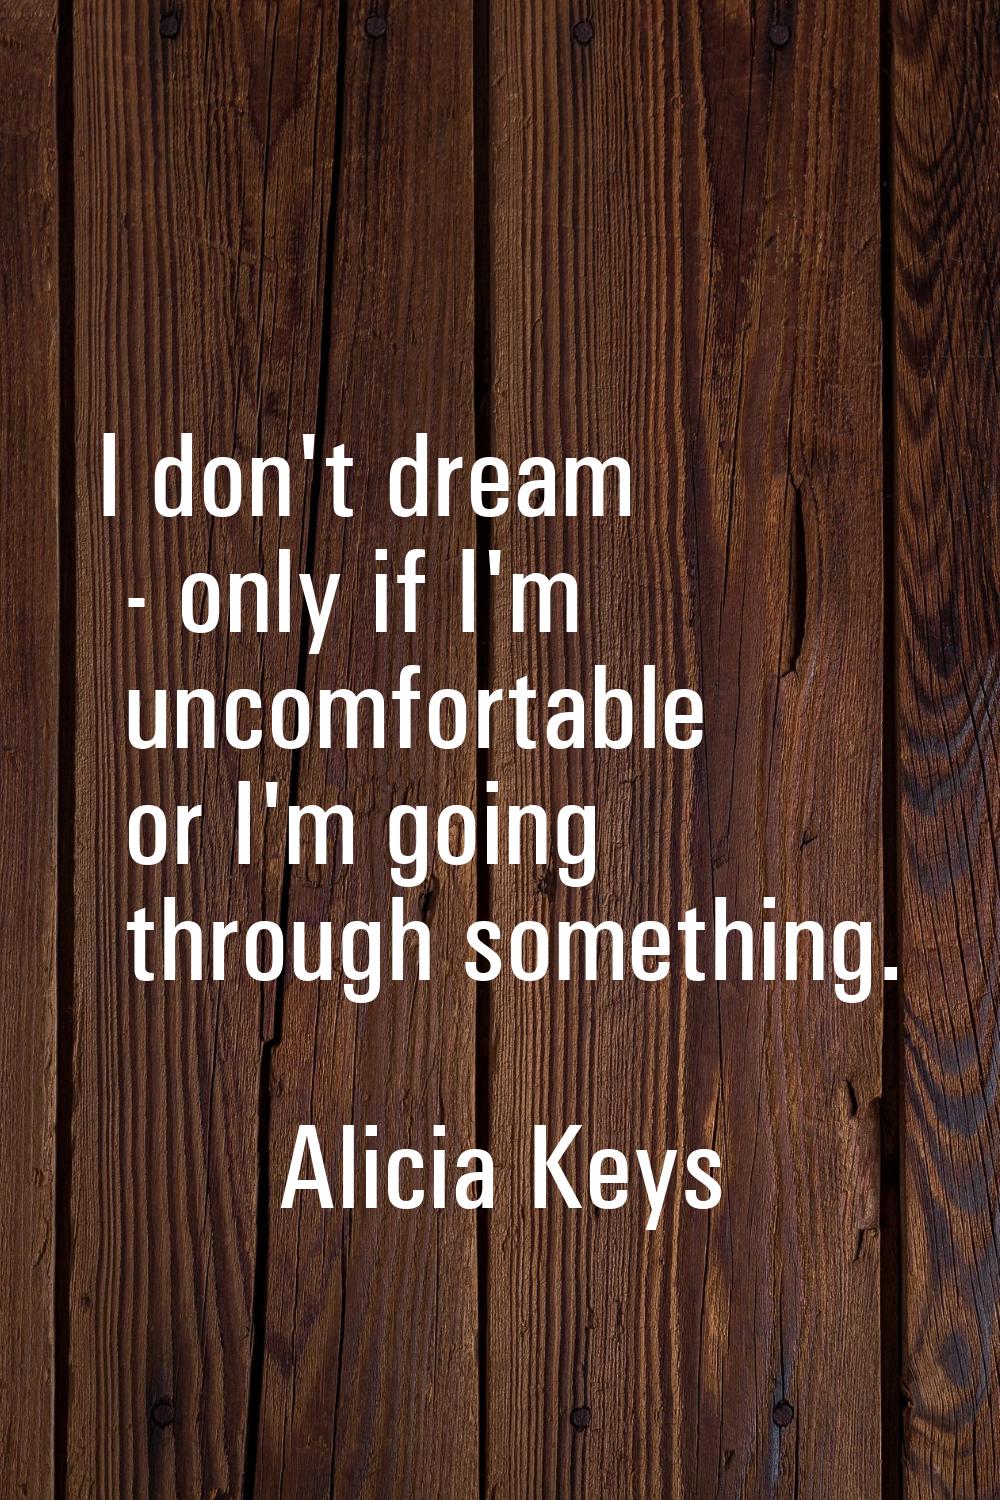 I don't dream - only if I'm uncomfortable or I'm going through something.